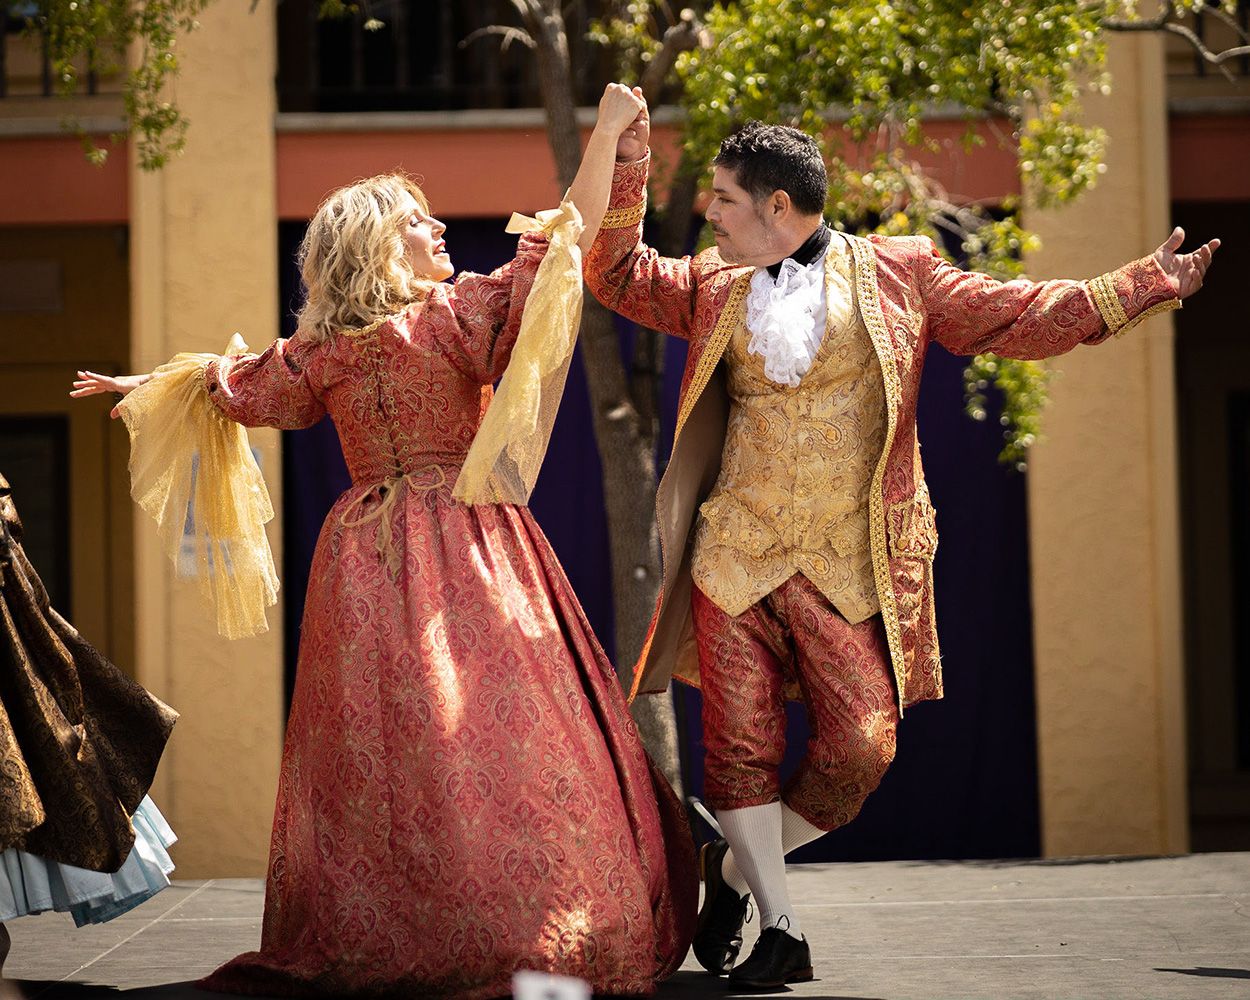 dancing couple dressed in matching venetian outfits in red and gold. 